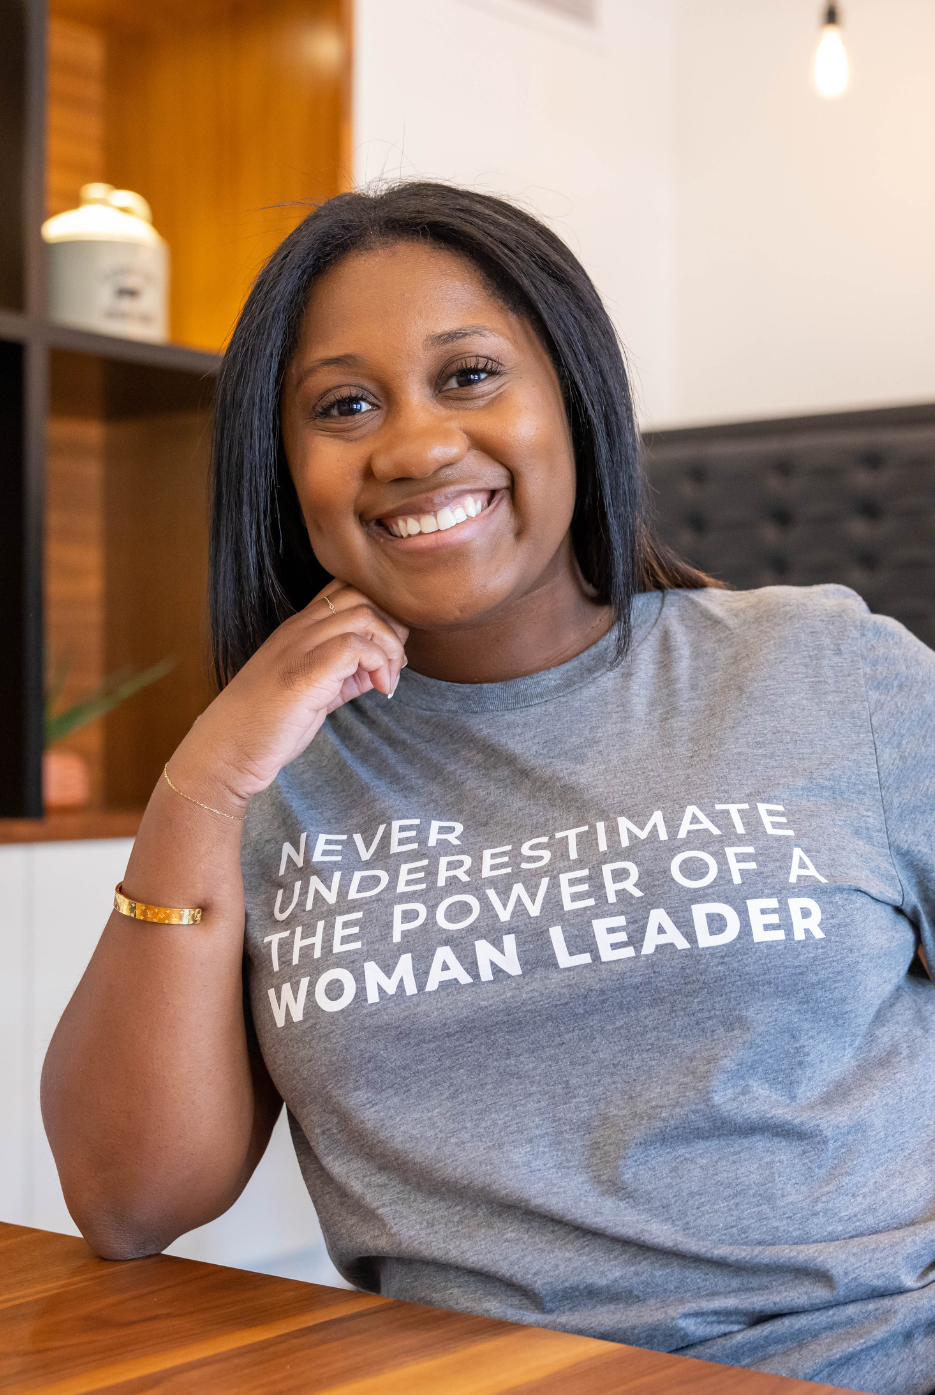 Never Underestimate the Power of A Women Leader